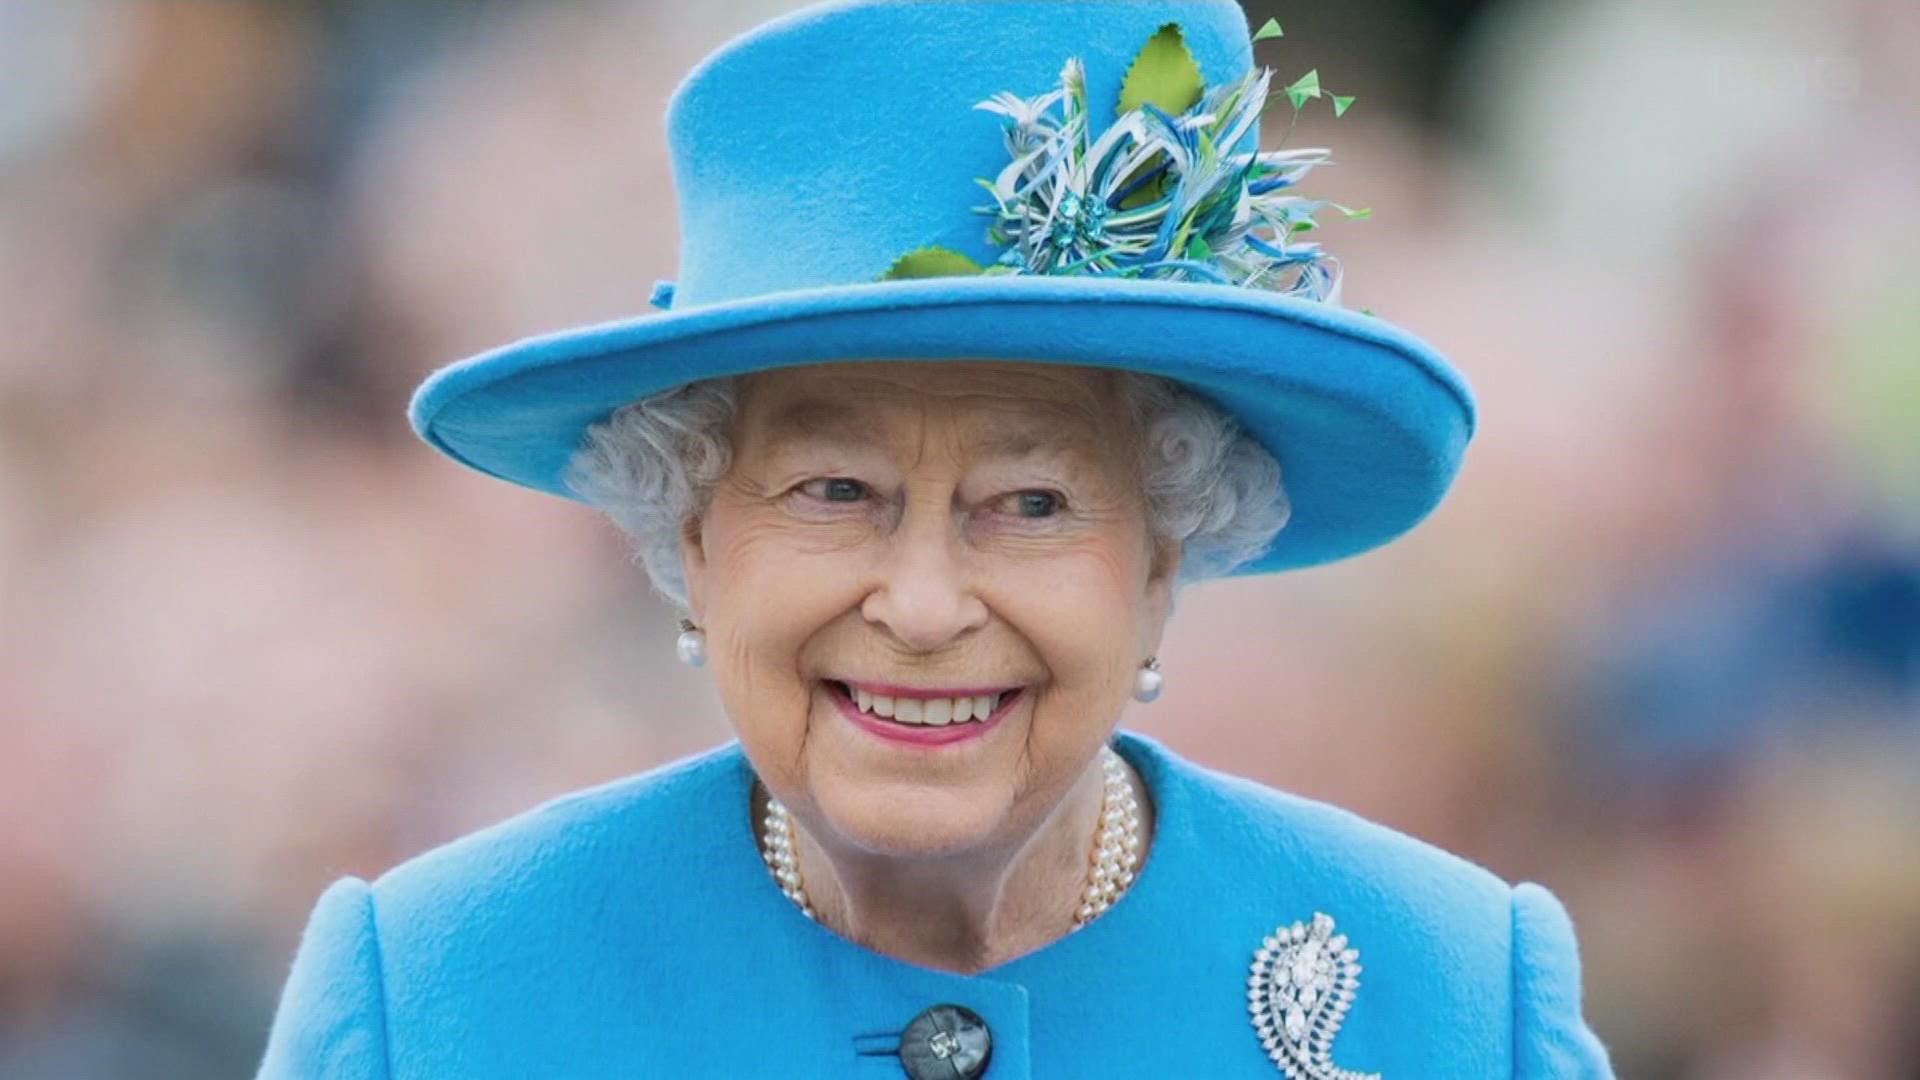 Here's what to know about the queen's funeral Monday morning.